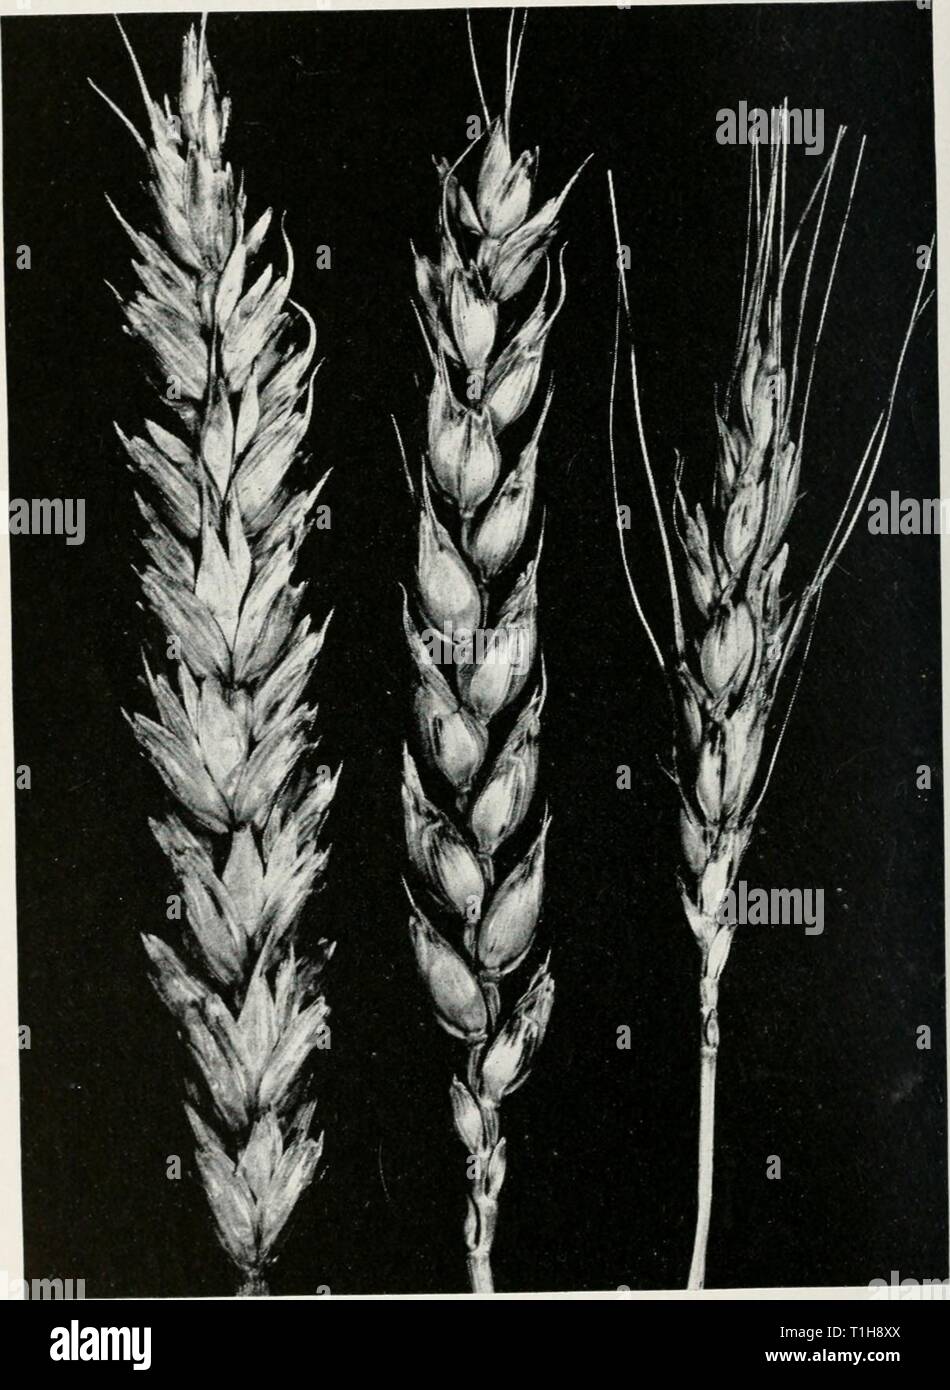 Diseases of wheat, oats, barley, Diseases of wheat, oats, barley, and rye  diseasesofwheato48boew Year: 1960  56 ILLINOIS NATURAL HISTORY SURVEY CIRCULAR US small, water-soaked areas which elongate to produce olive-green streaks. With age the streaks turn yellowish-brown and later    Fig. 17.—Black chaff on wheat. Bacteria invading the tissues of glumes produce dark, sunken streaks on the upper parts of the glumes. Usually Sar streaks are found on the stems below the heads and upper joints, and elongated, olive-green streaks occur on the leaves. Stock Photo